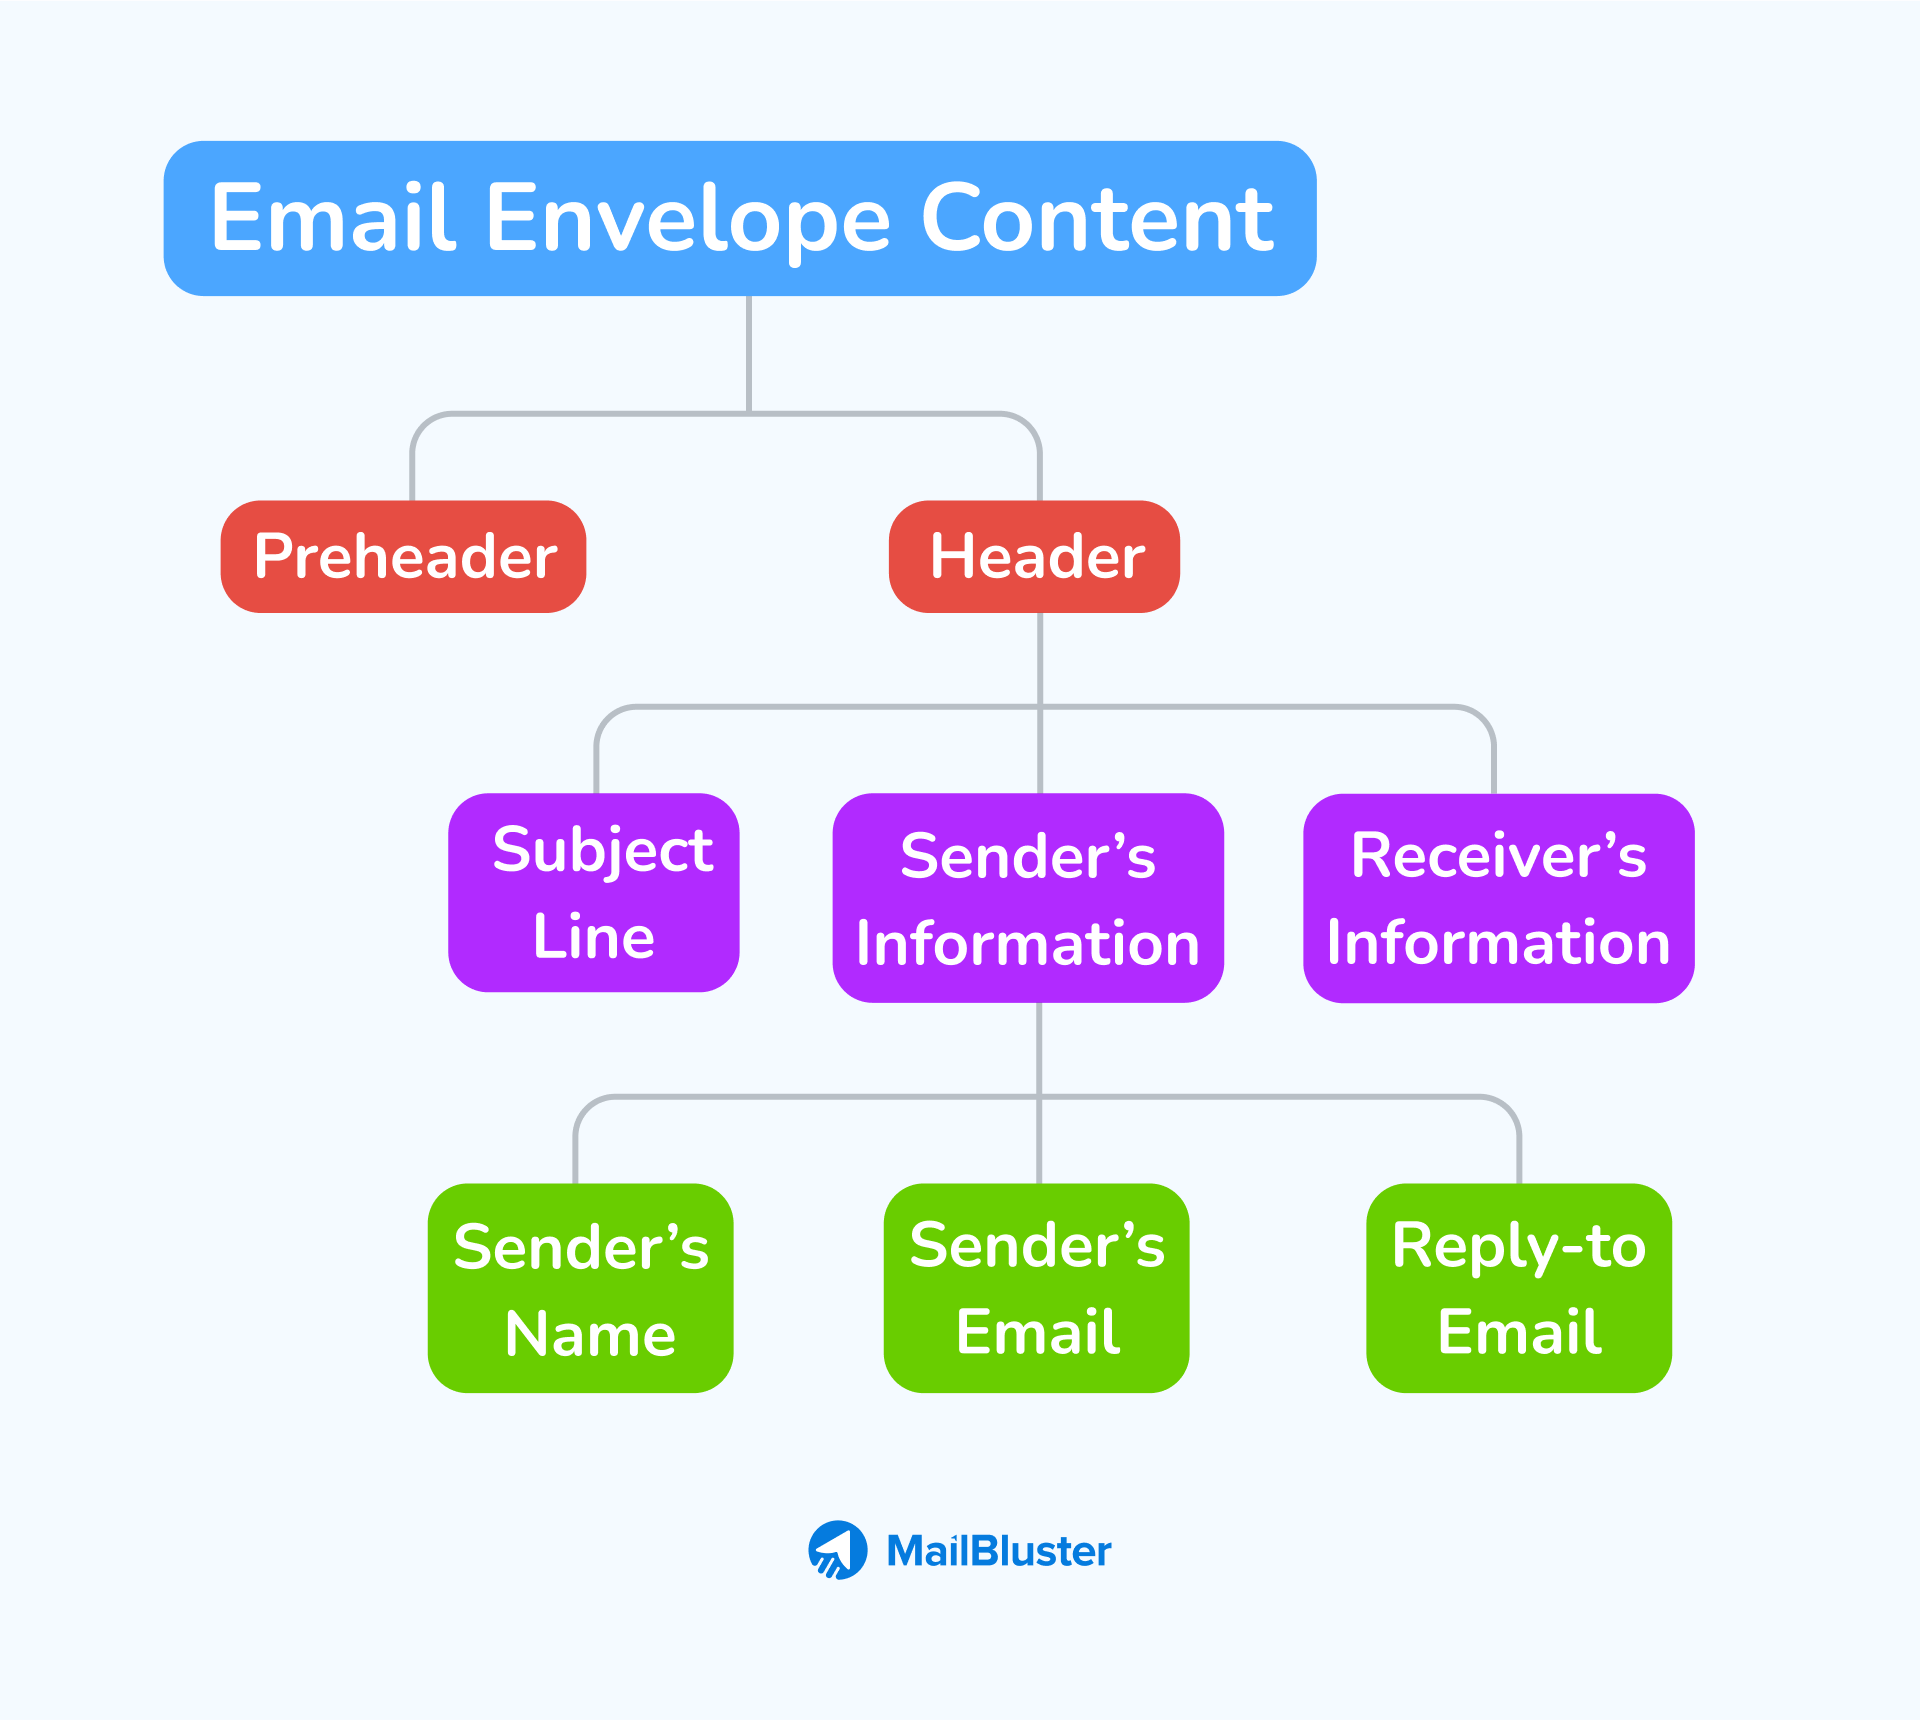 Email envelop content for the best practices of email marketing